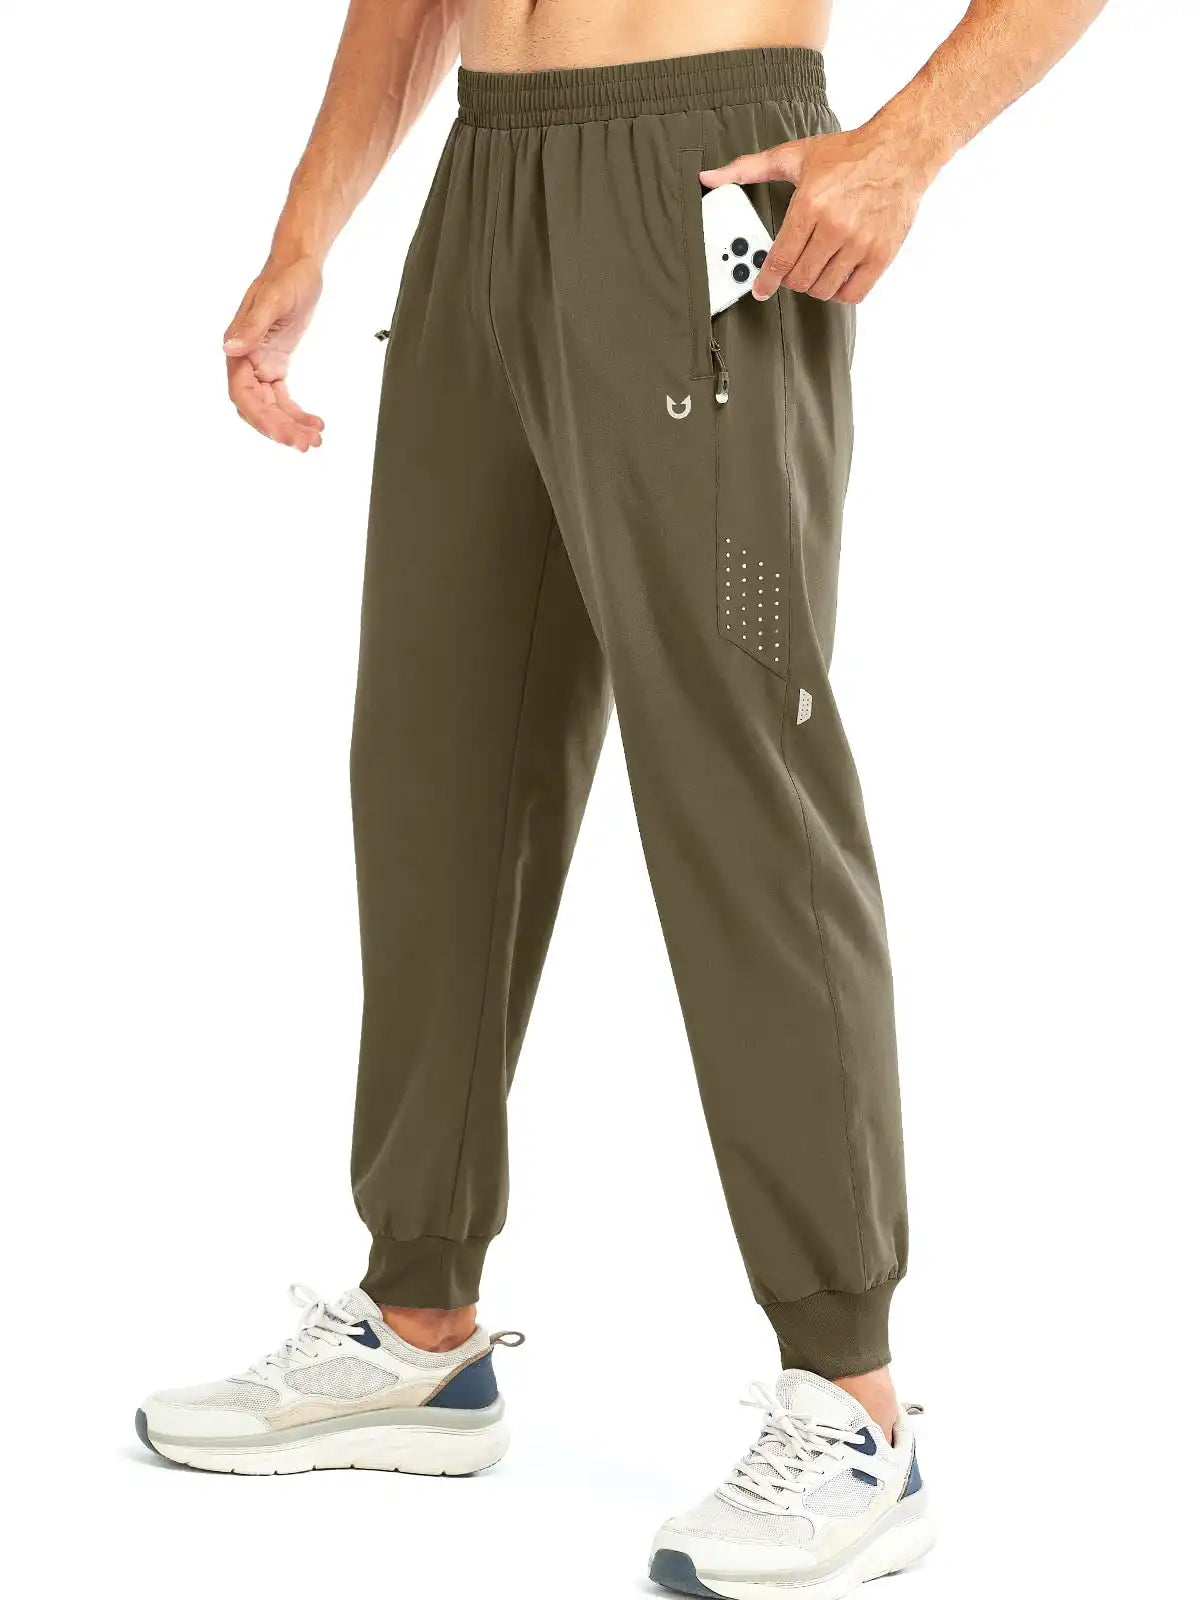 NORTHYARD Men's Athletic Joggers Gym Running Pants Lightweight Active ...